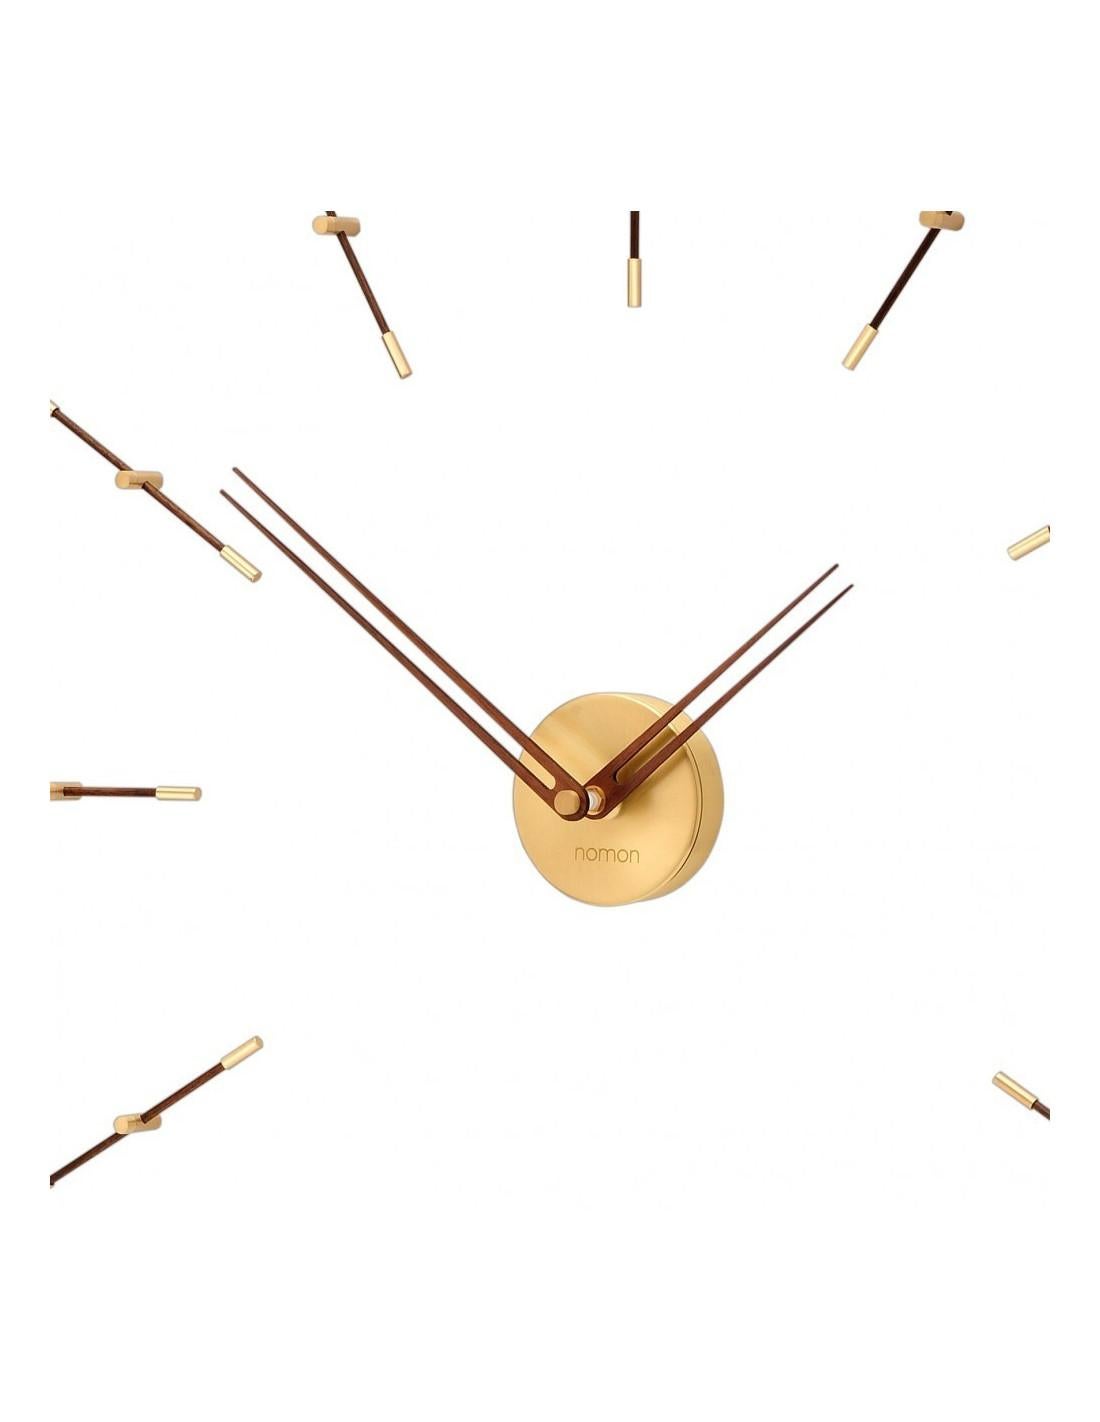 The Merlin mini 12 Gold N stands out among all modern wall clocks thanks to its walnut needles reinforced with golden counterweights to which we must add its 12 elegant time points with a beautiful polished brass and wood finish with walnut.
Mini